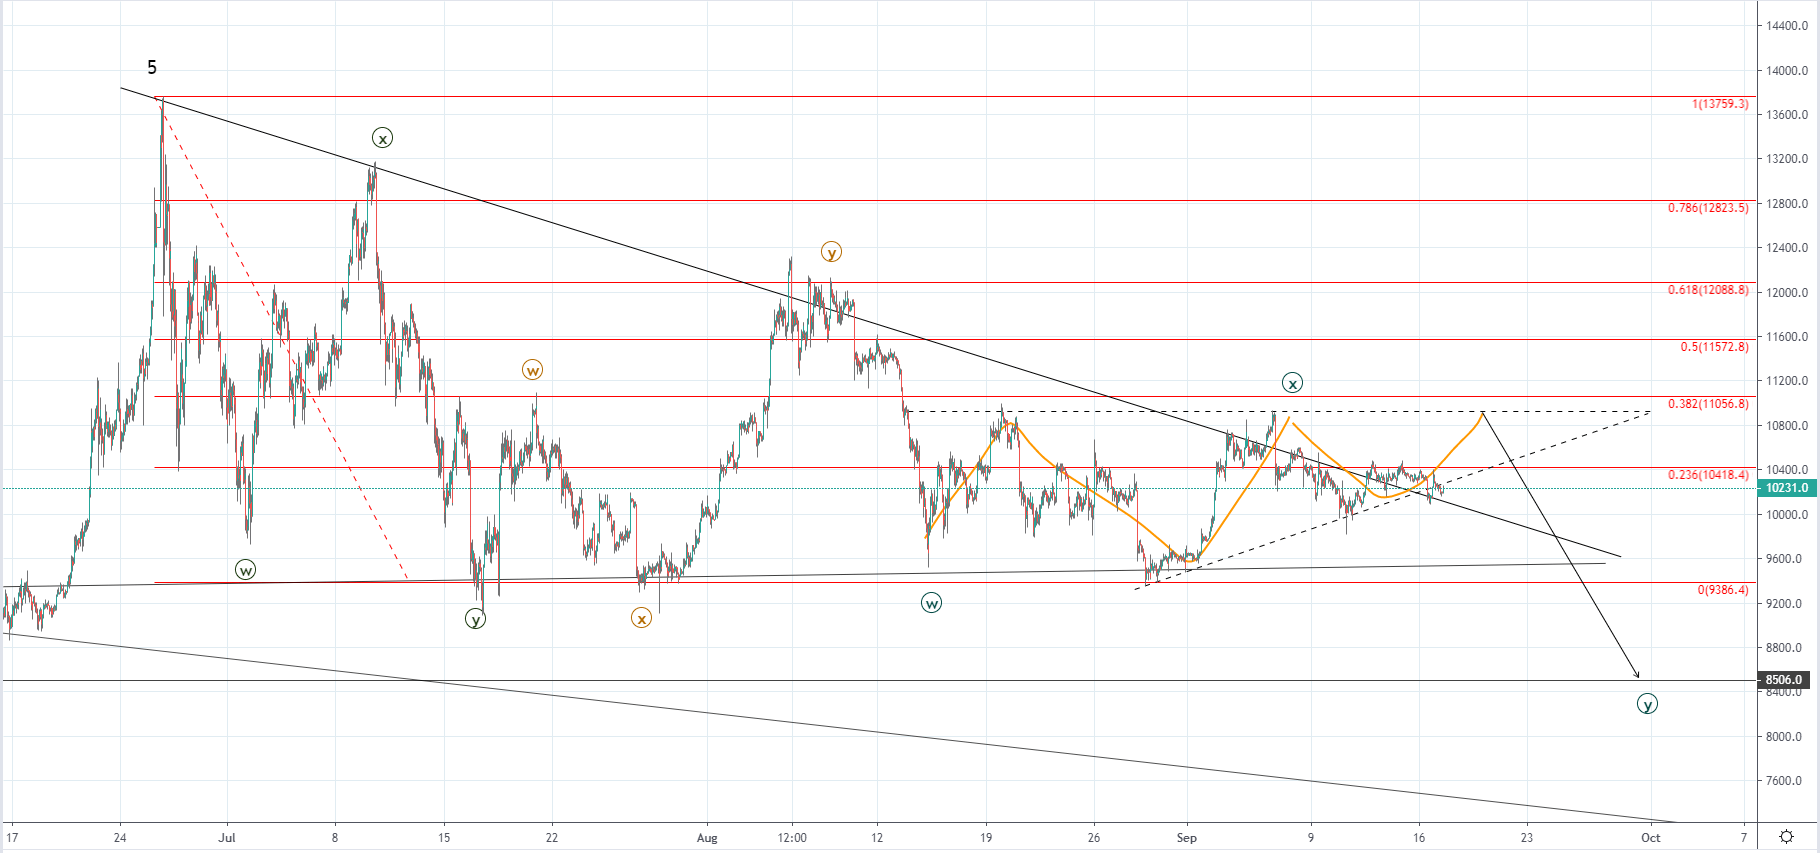 BTC still indecisive while XRP is looking bullish